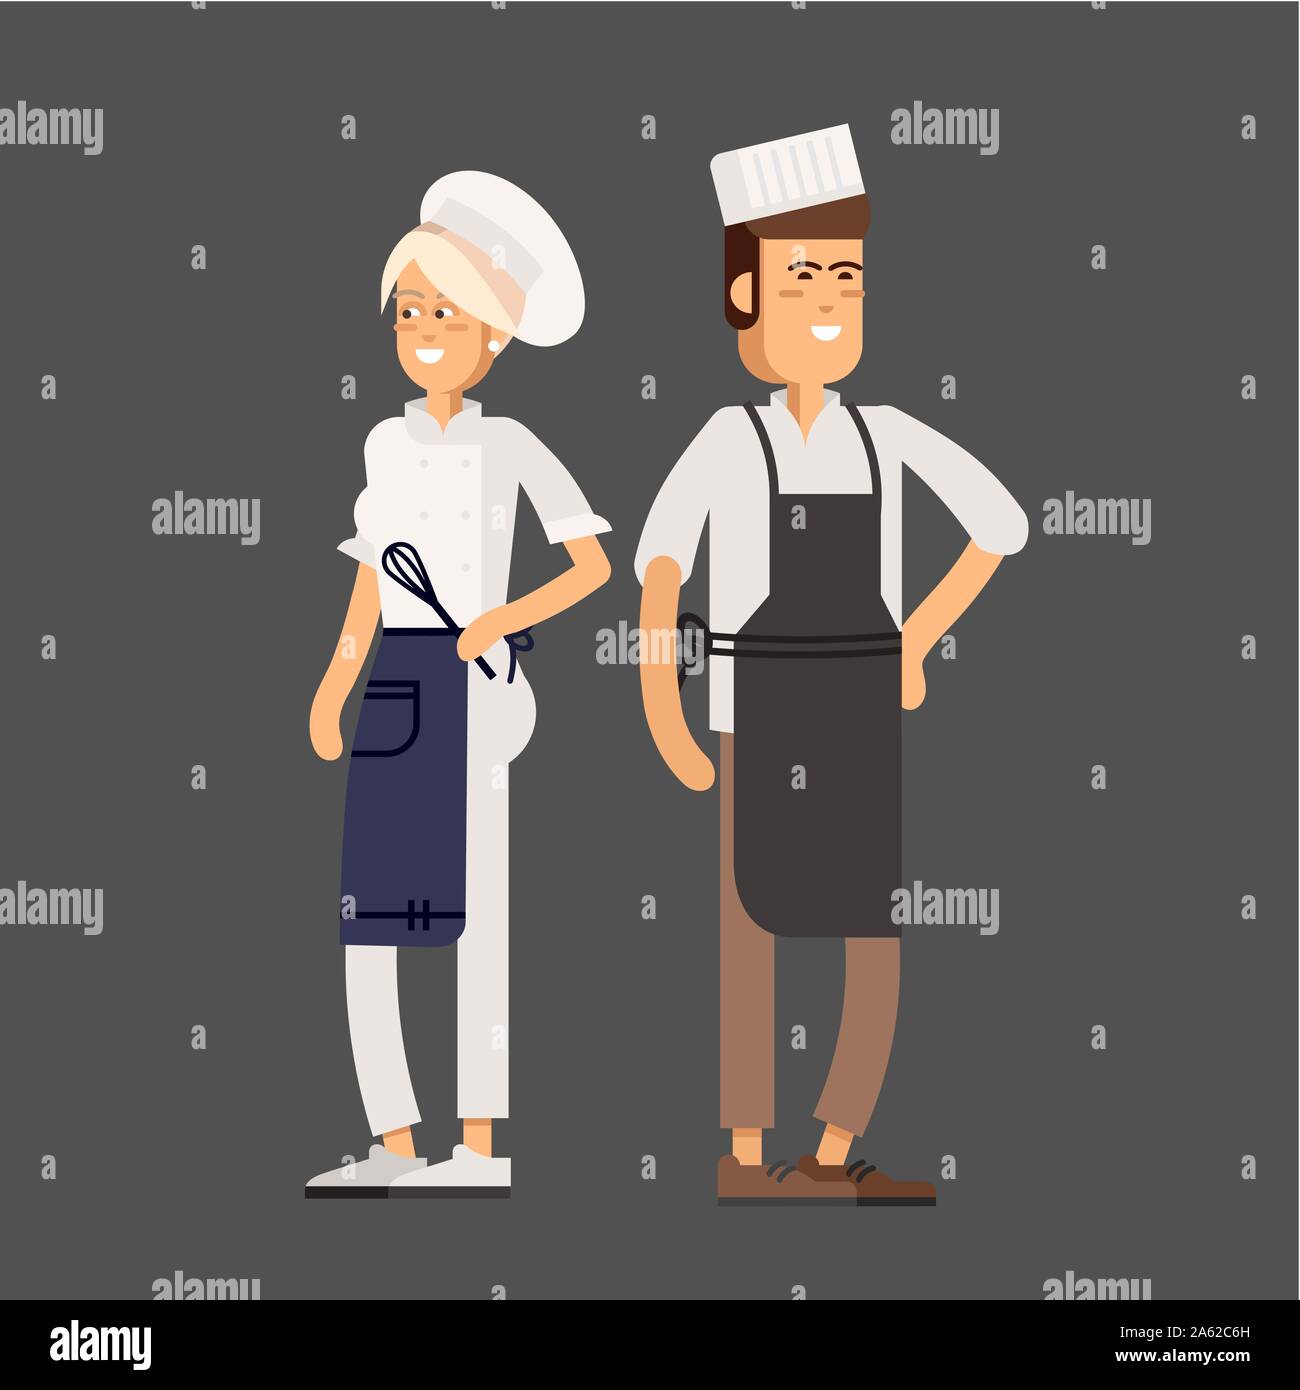 Cool vector flat design culinary and cuisine professionals. Stock Vector